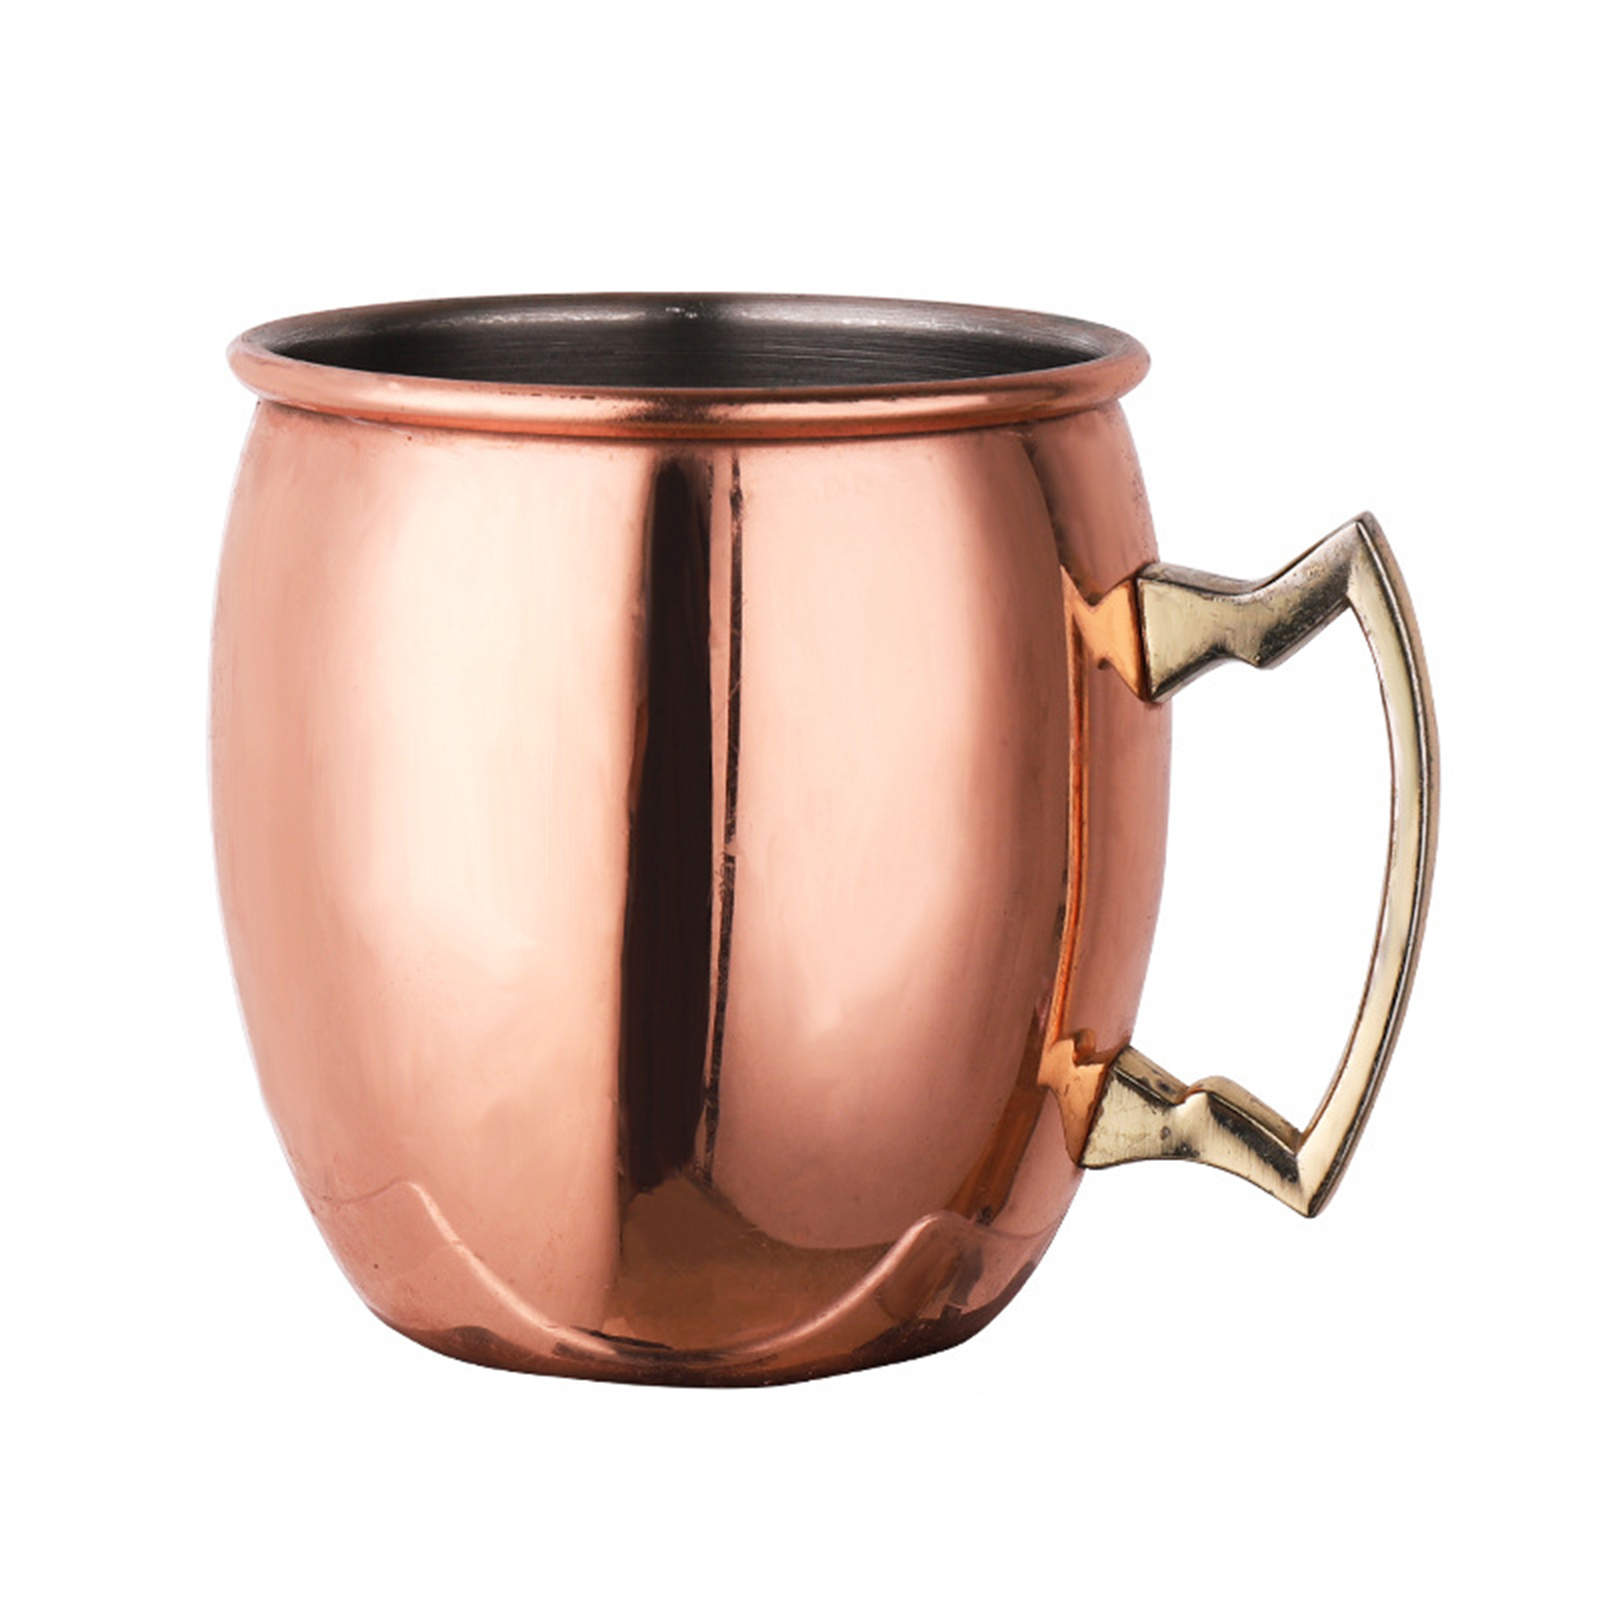 Moscow Mule Copper Mugs Hand-made 304 Stainless Steel Copper Mugs For Cocktails Whiskey Champagne Wine